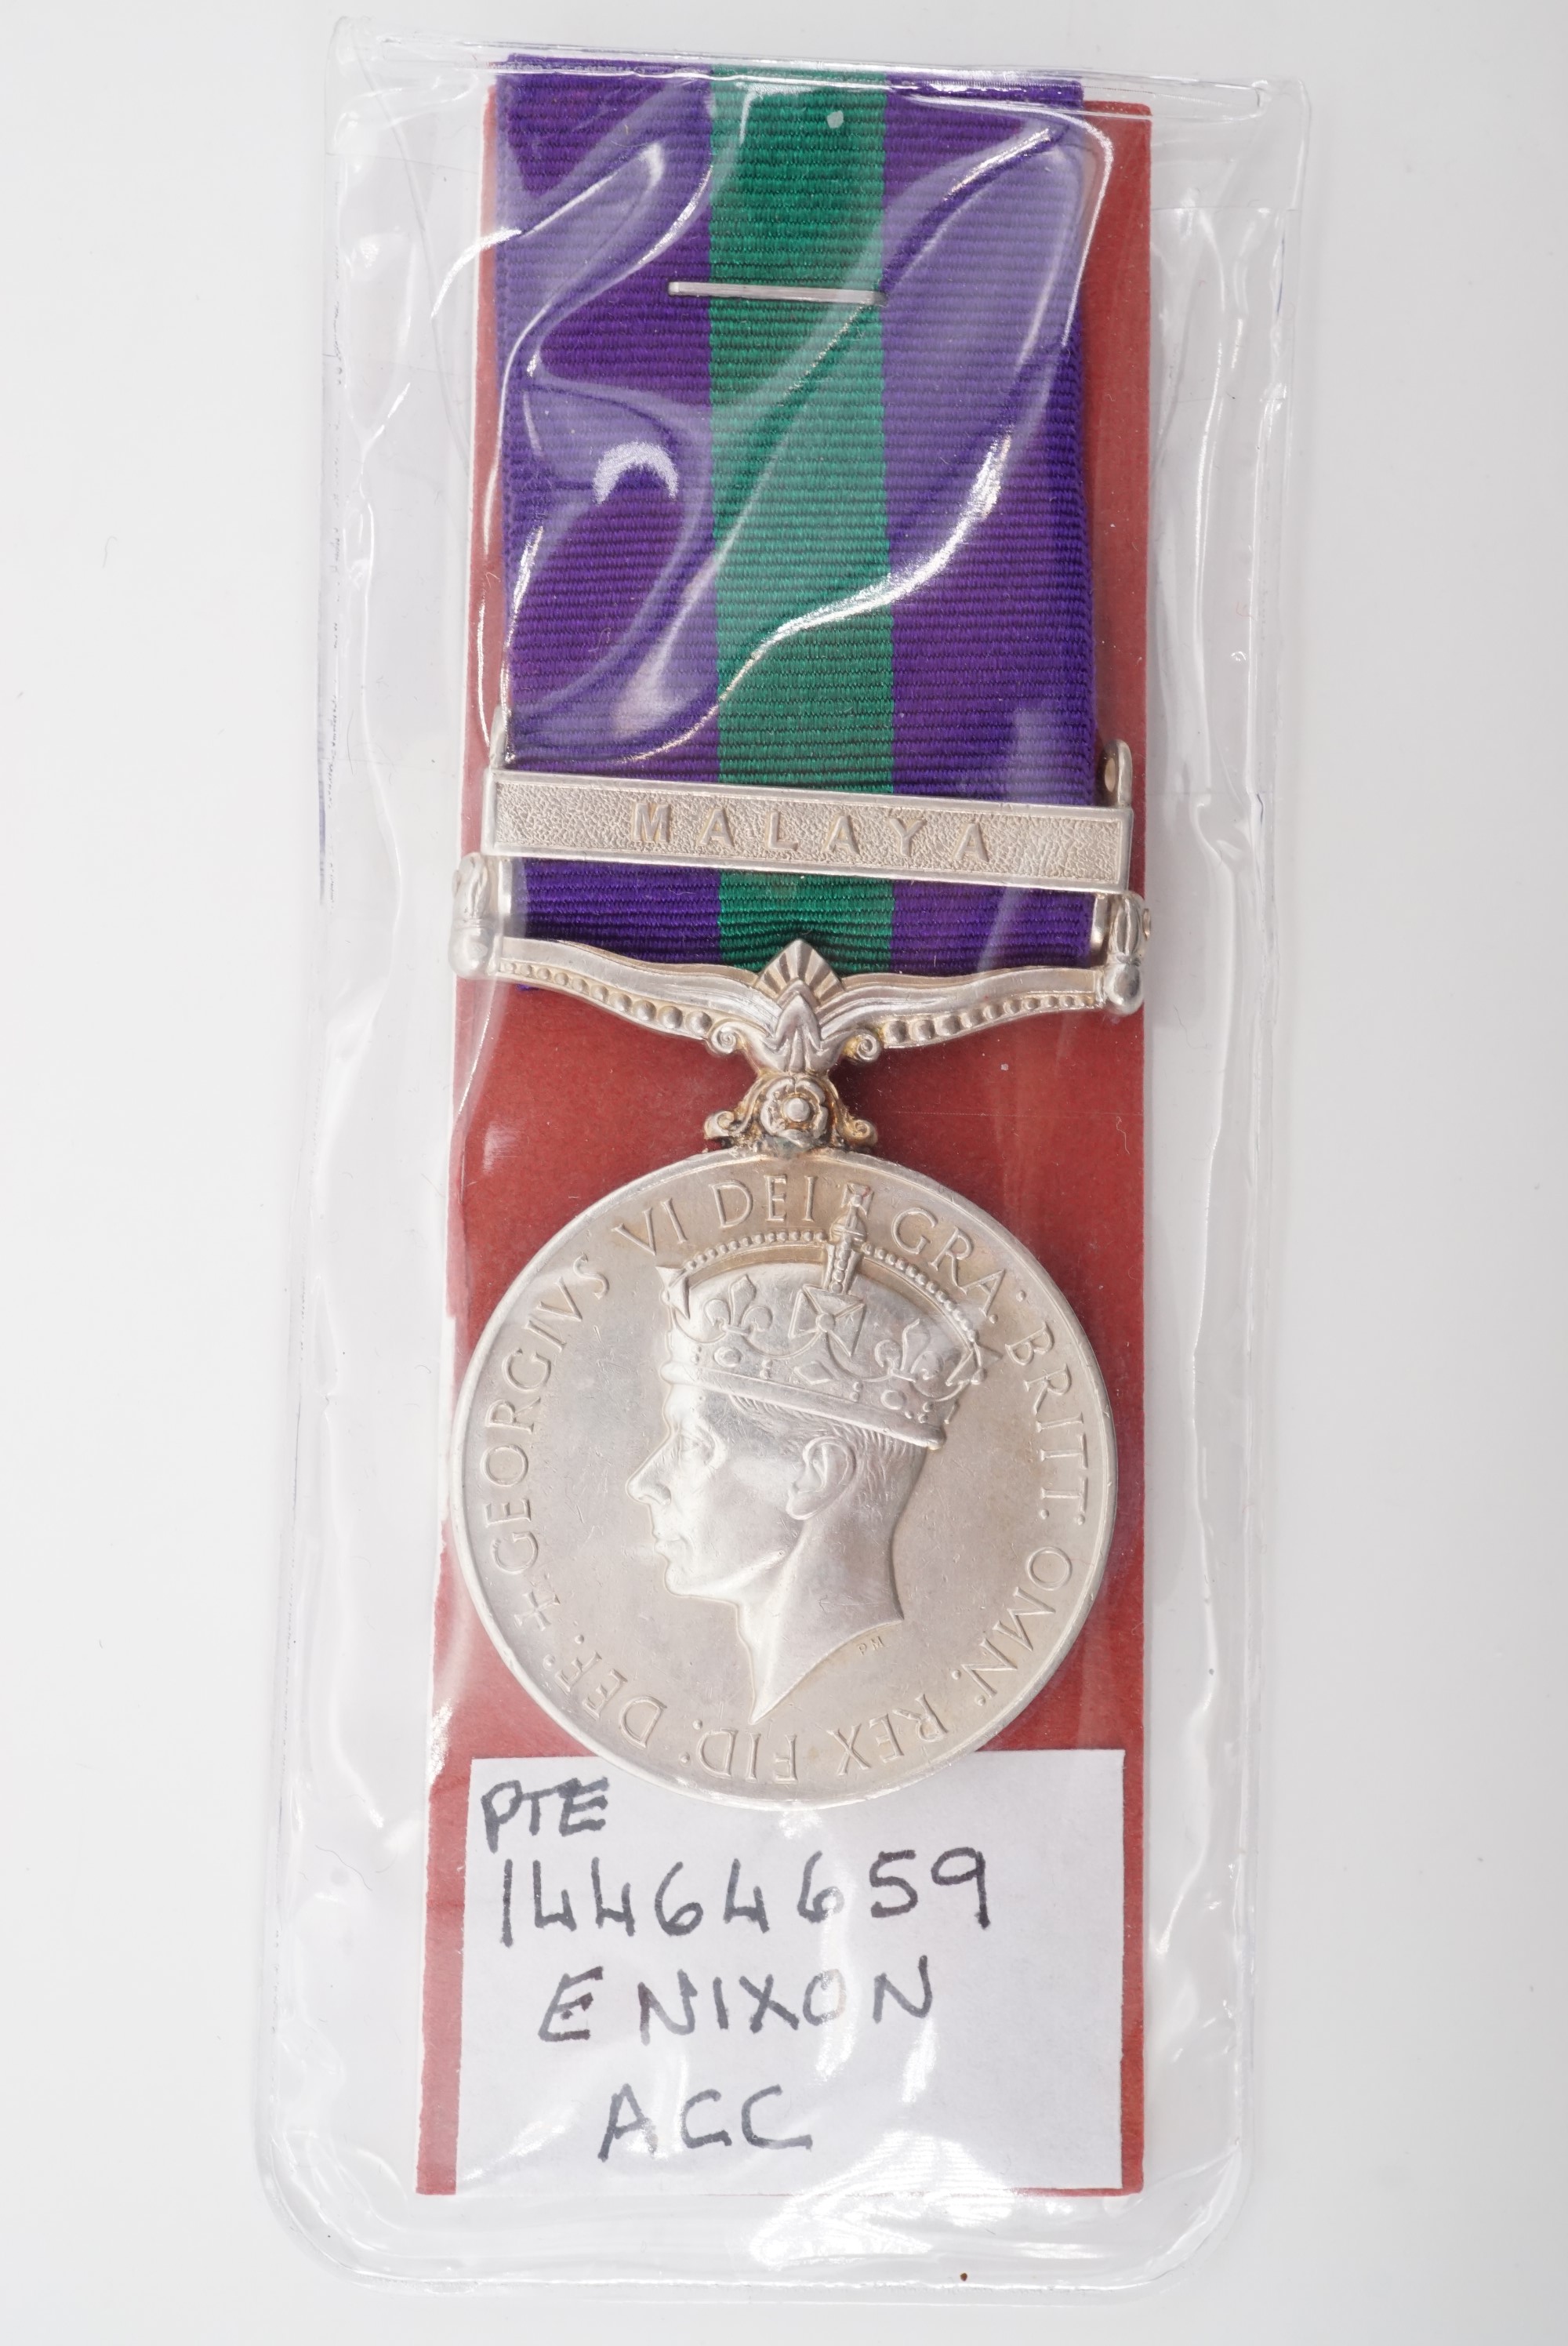 A George VI General Service Medal with Malaya clasp to 14464659 Pte A Nixon, ACC